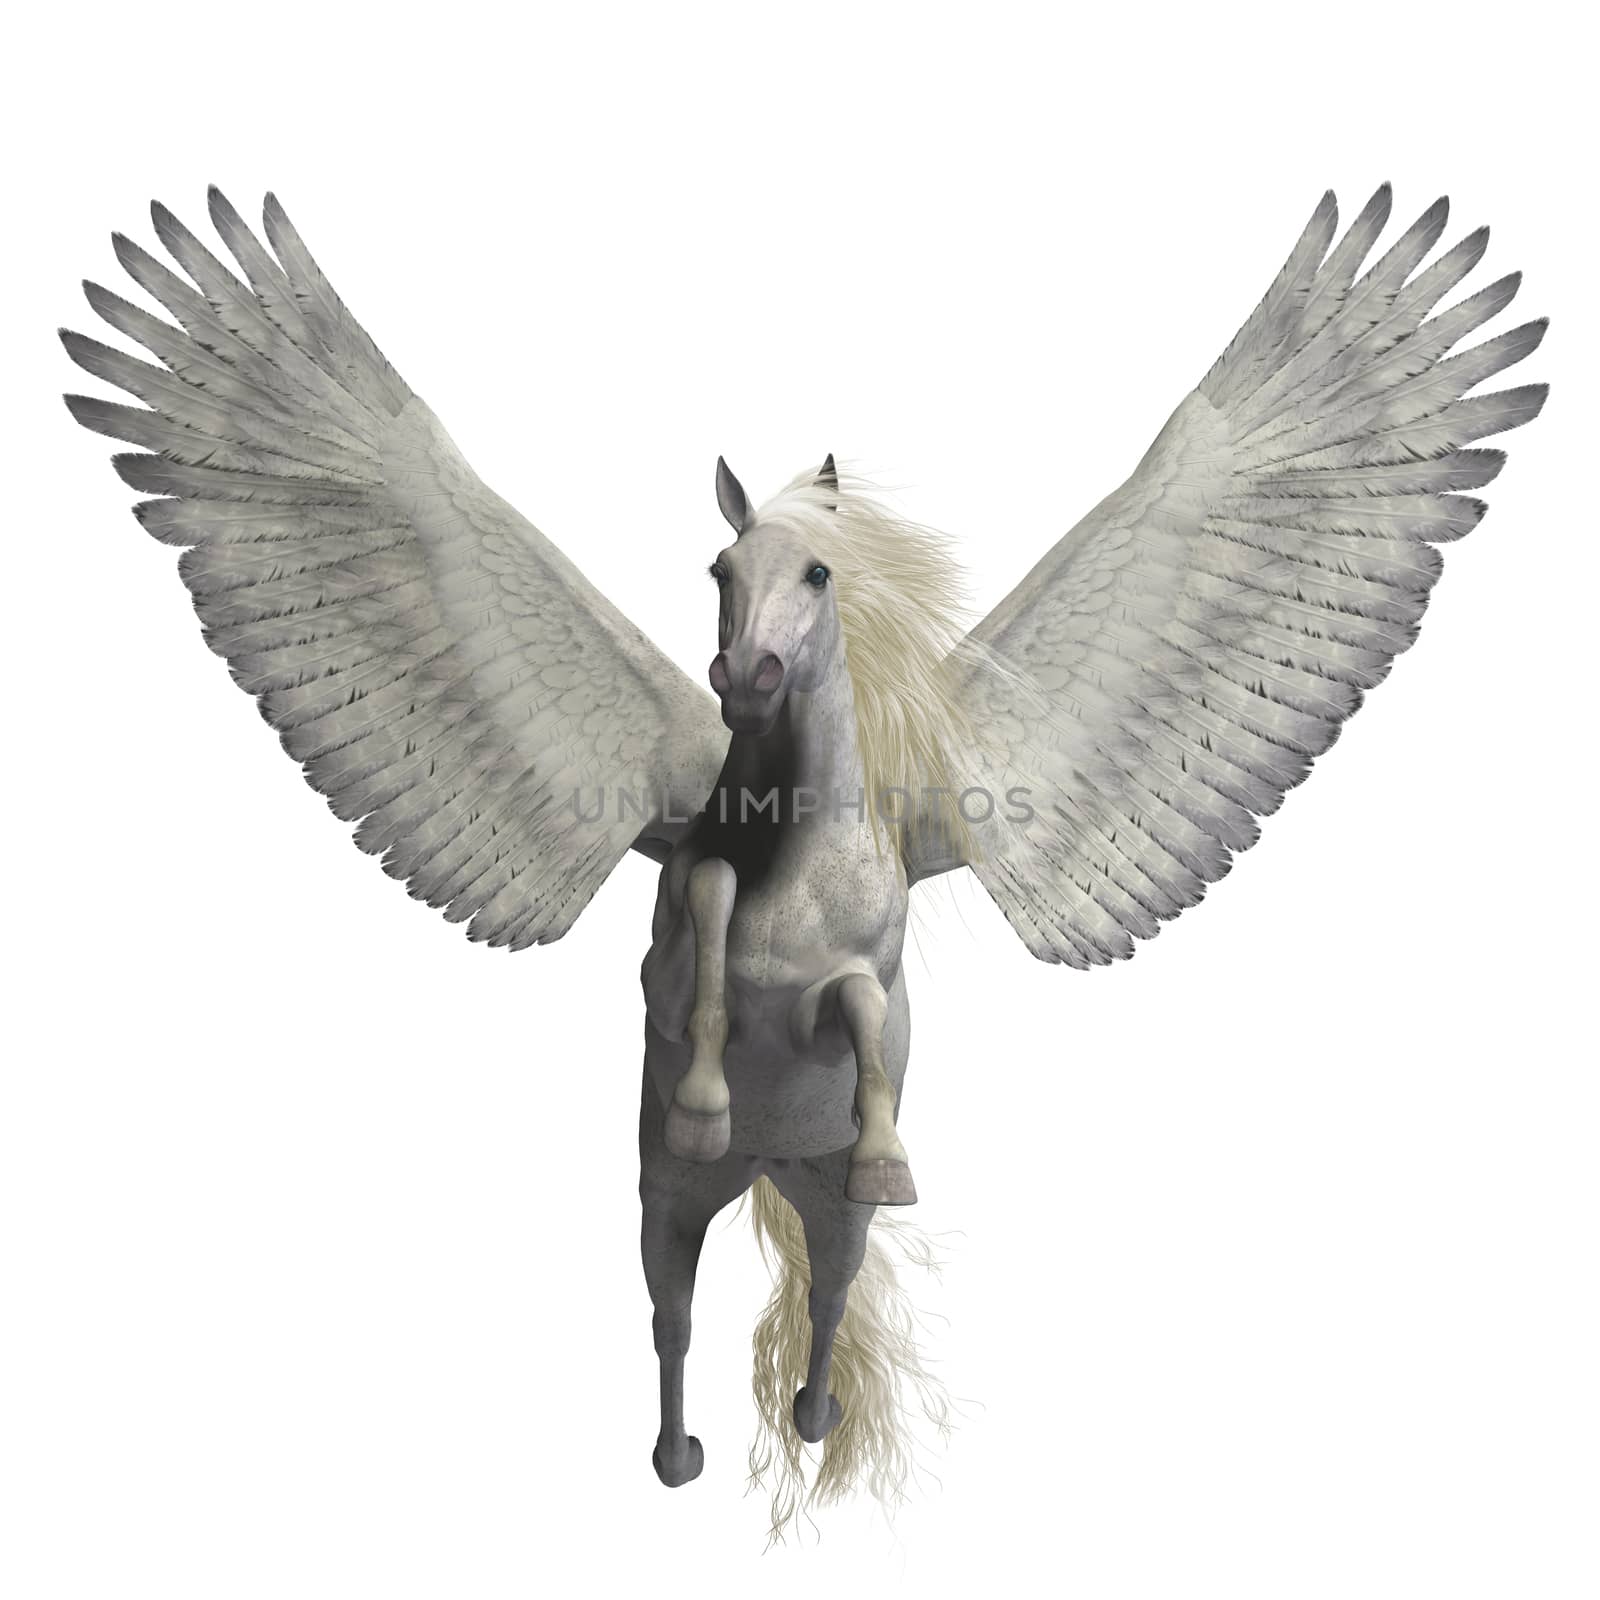 Pegasus is a legendary divine winged stallion and is the best known creature of Greek mythology.